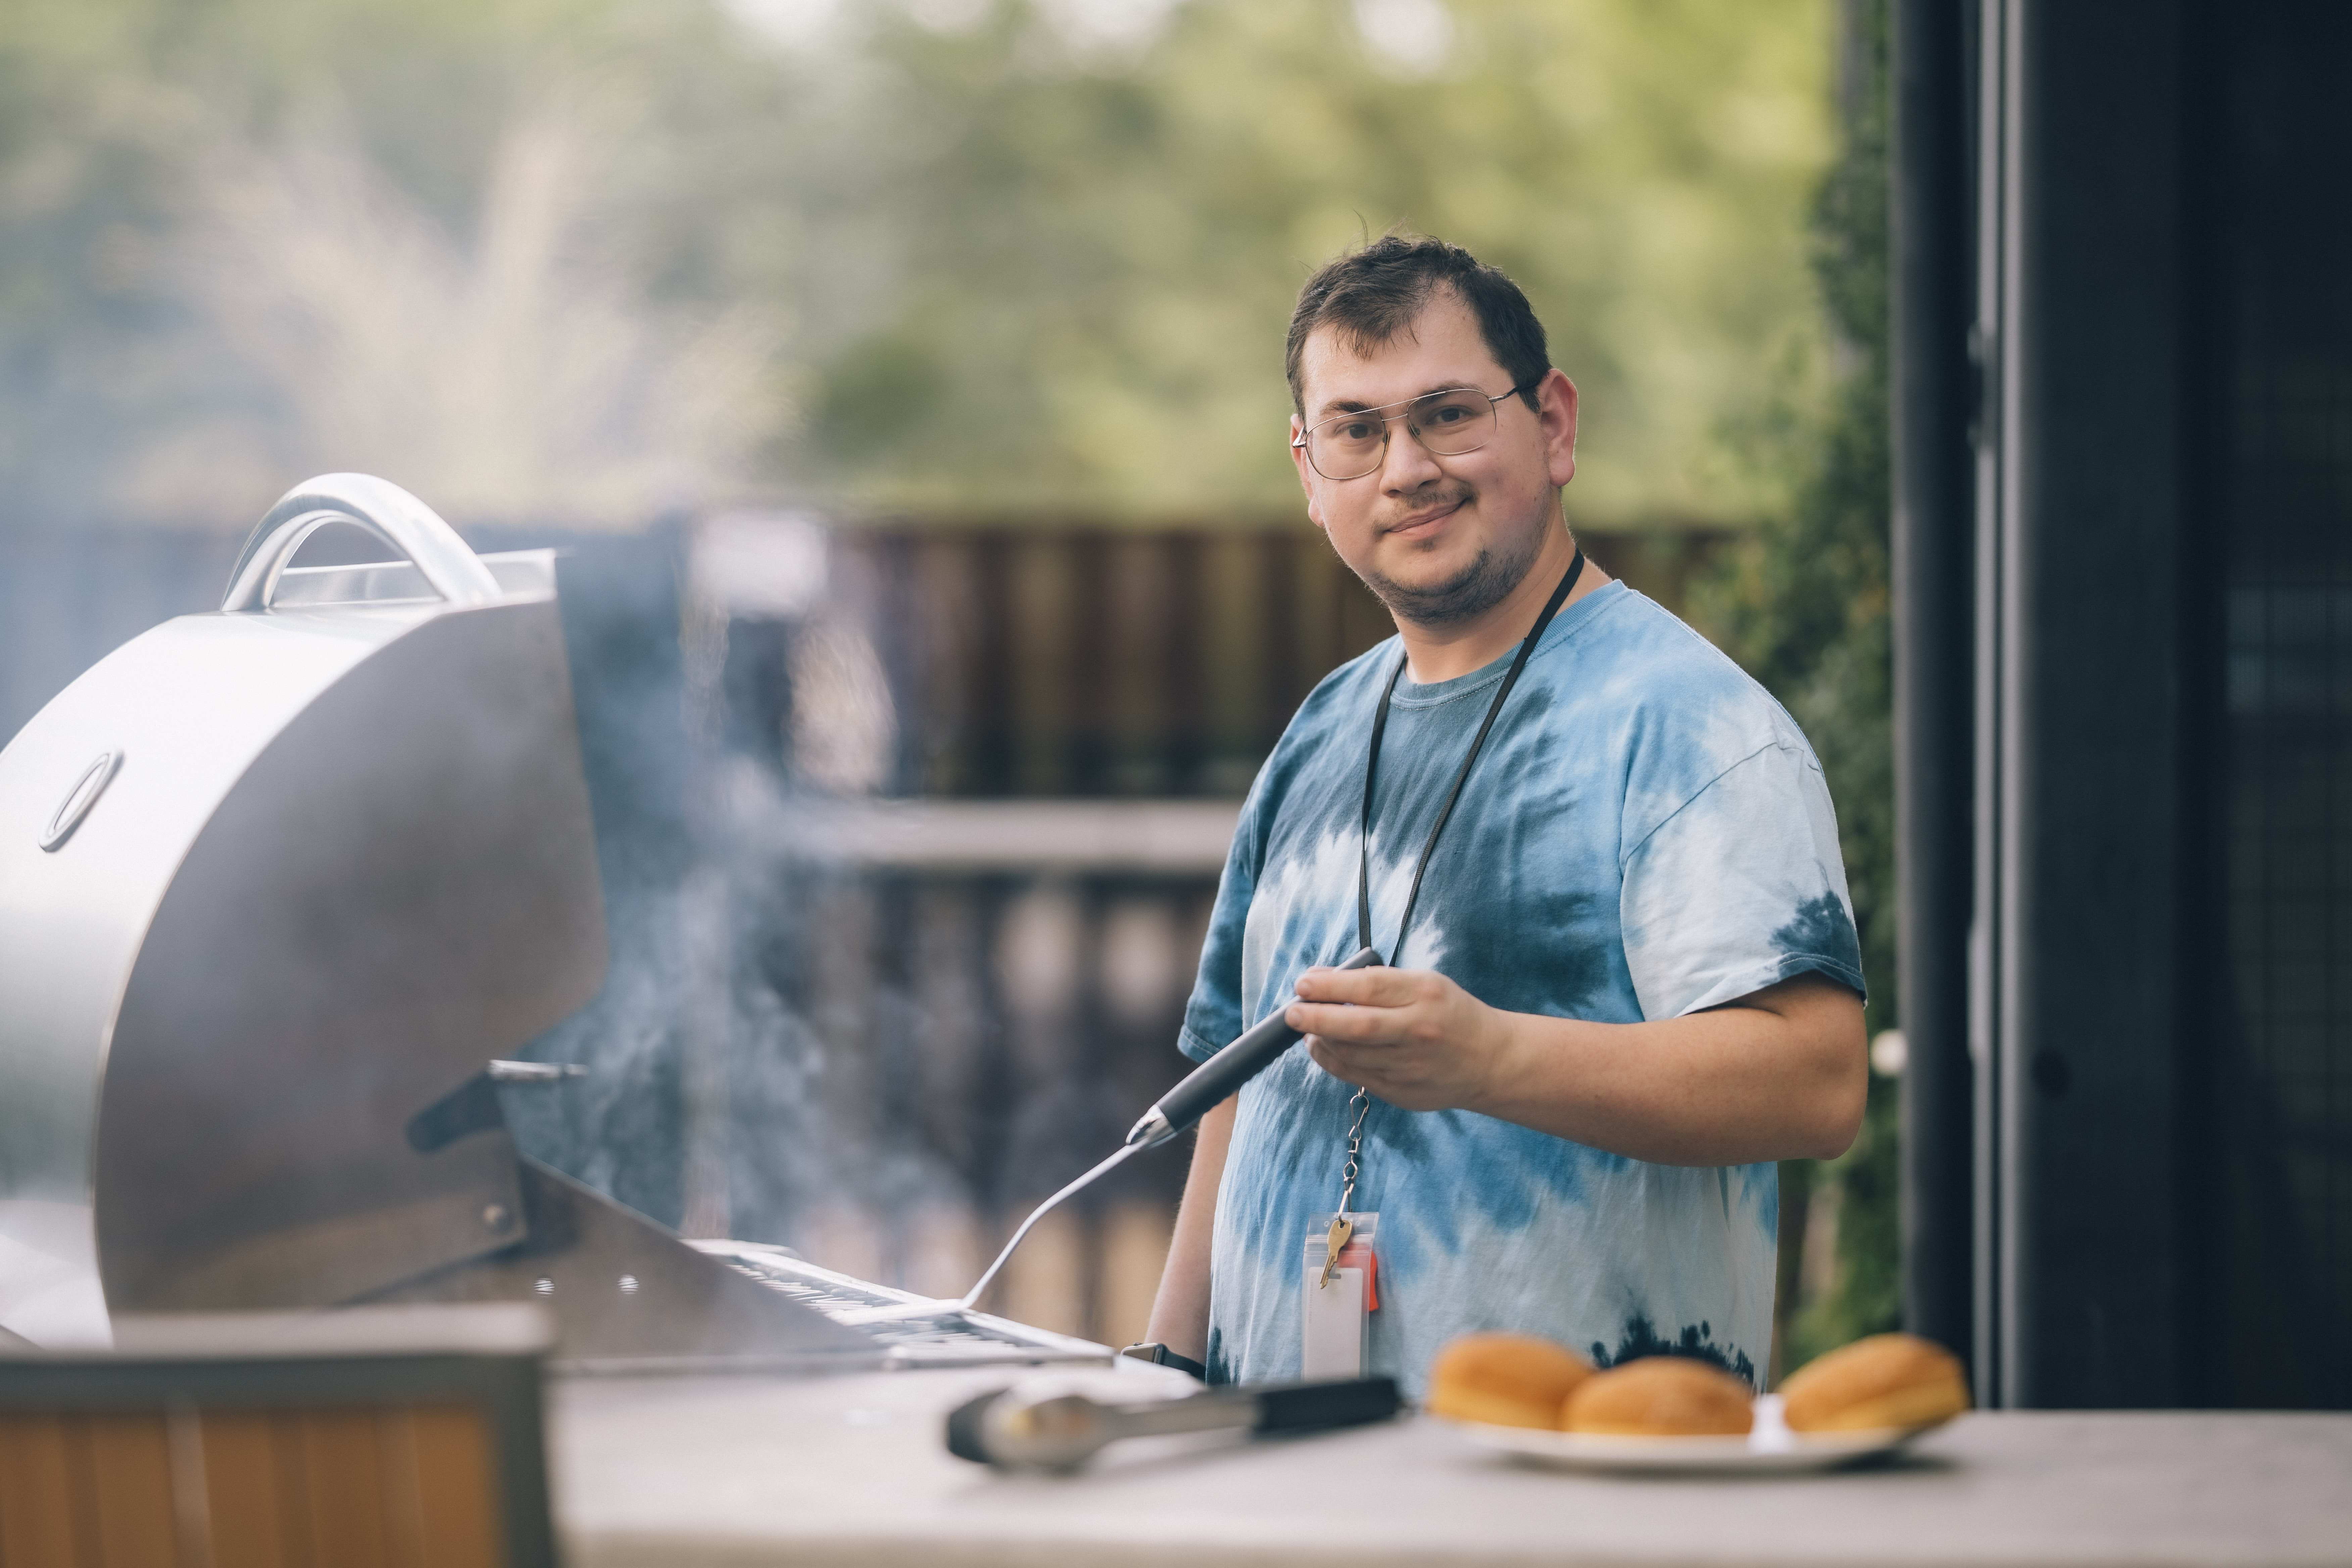 Eli holding a spatula standing in front of a smoking grill next to a plate of hamburger buns